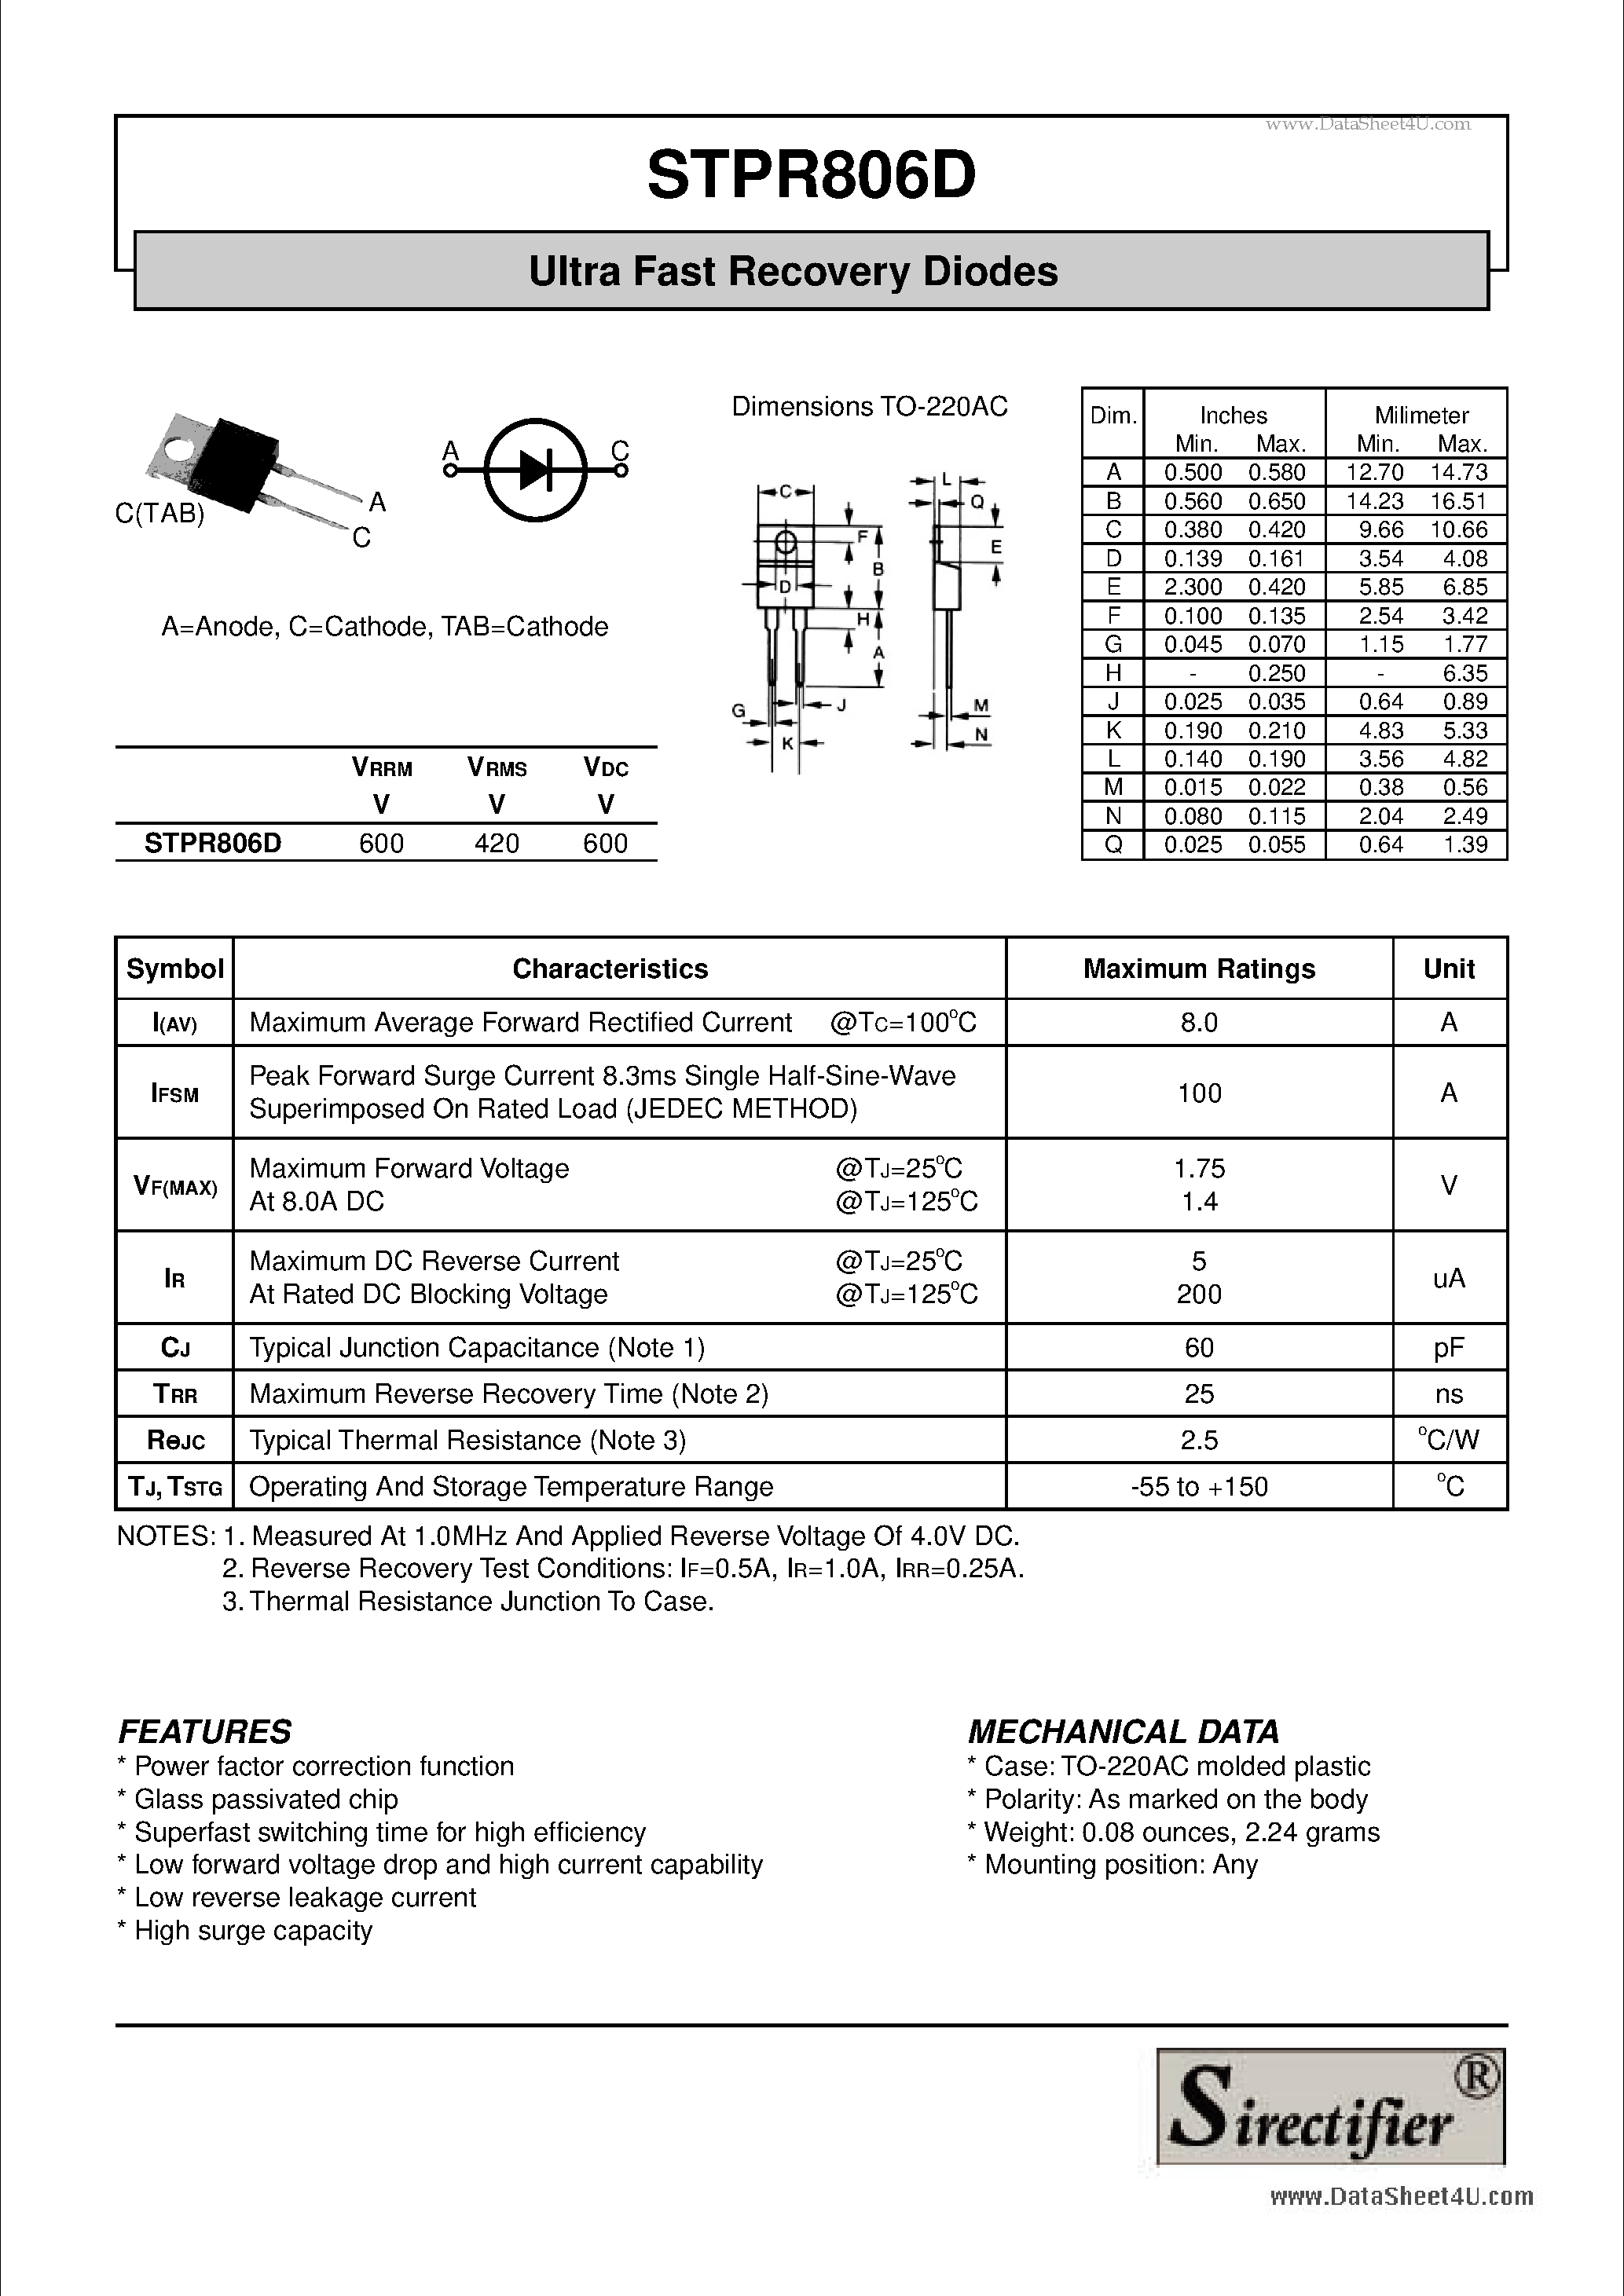 Datasheet STPR806D - Ultra Fast Recovery Diodes page 1